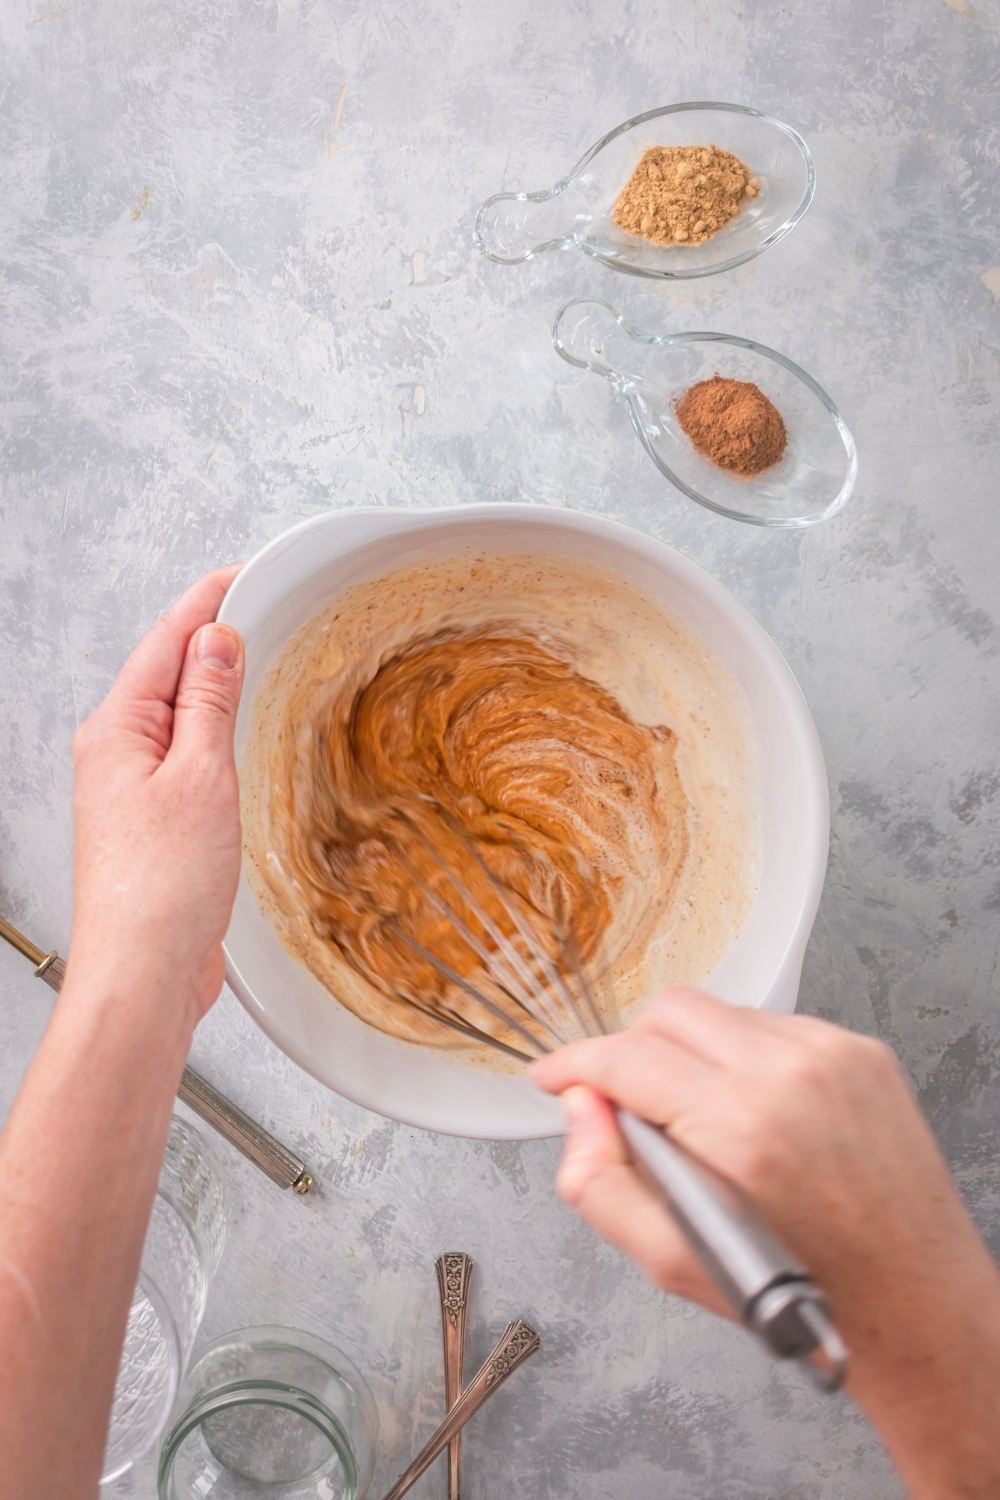 A white bowl on a gray counter with pumpkin ice cream ingredients in it. There is a hand holding a whisk mixing the ingredients together.